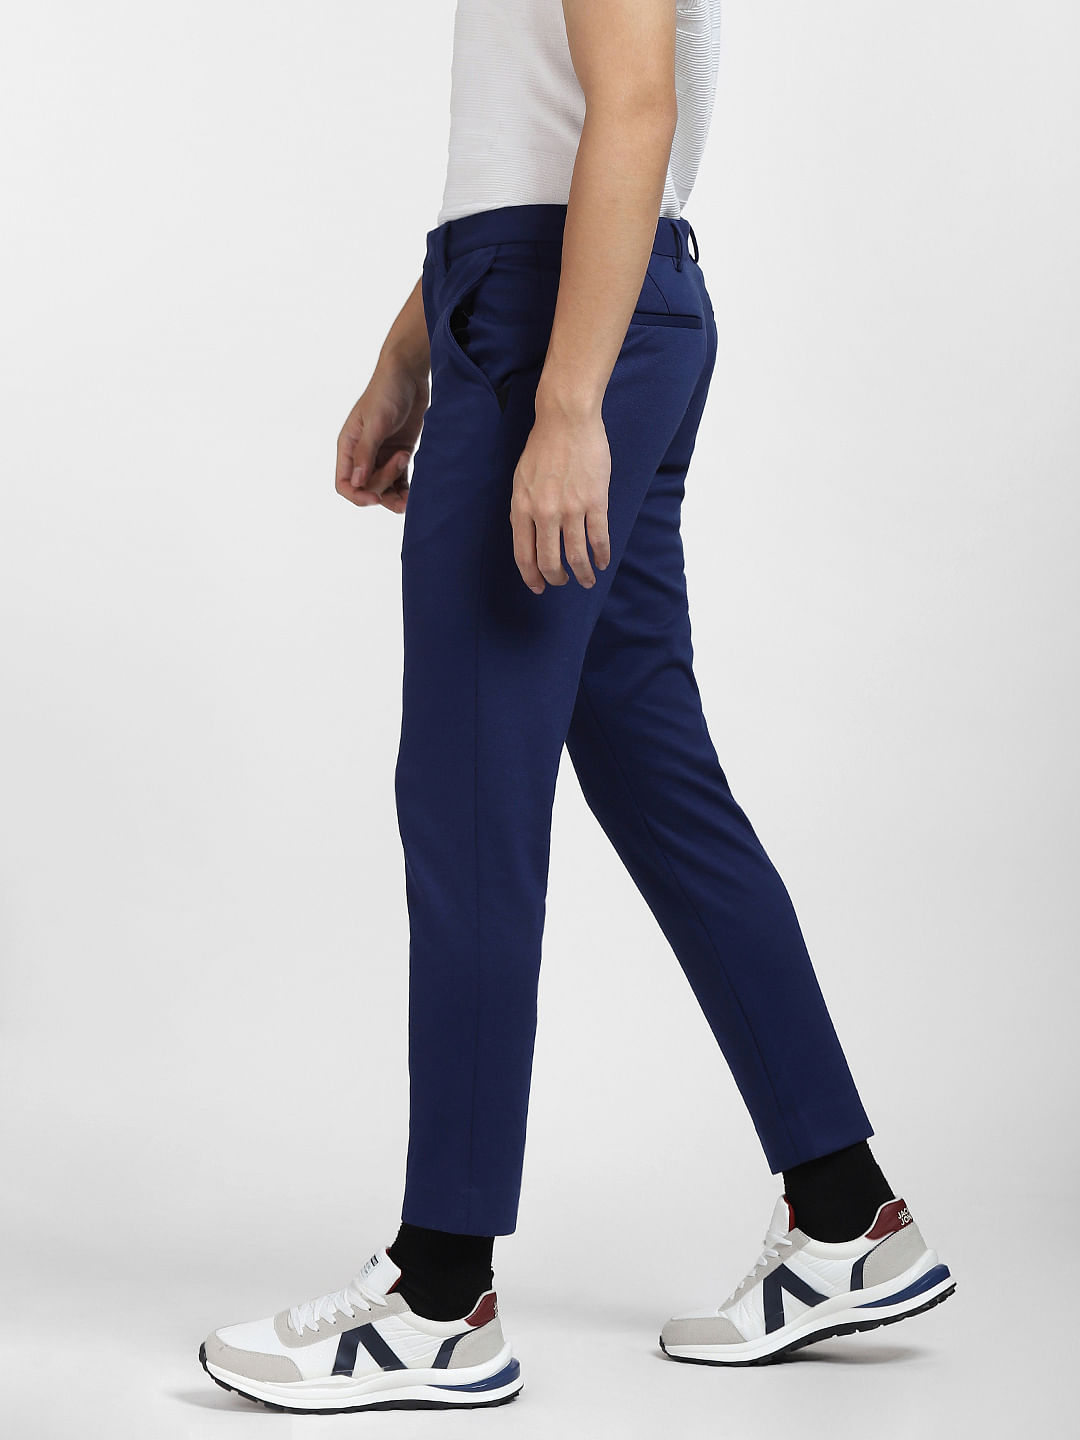 Buy Louis Philippe Blue Trousers Online  717012  Louis Philippe